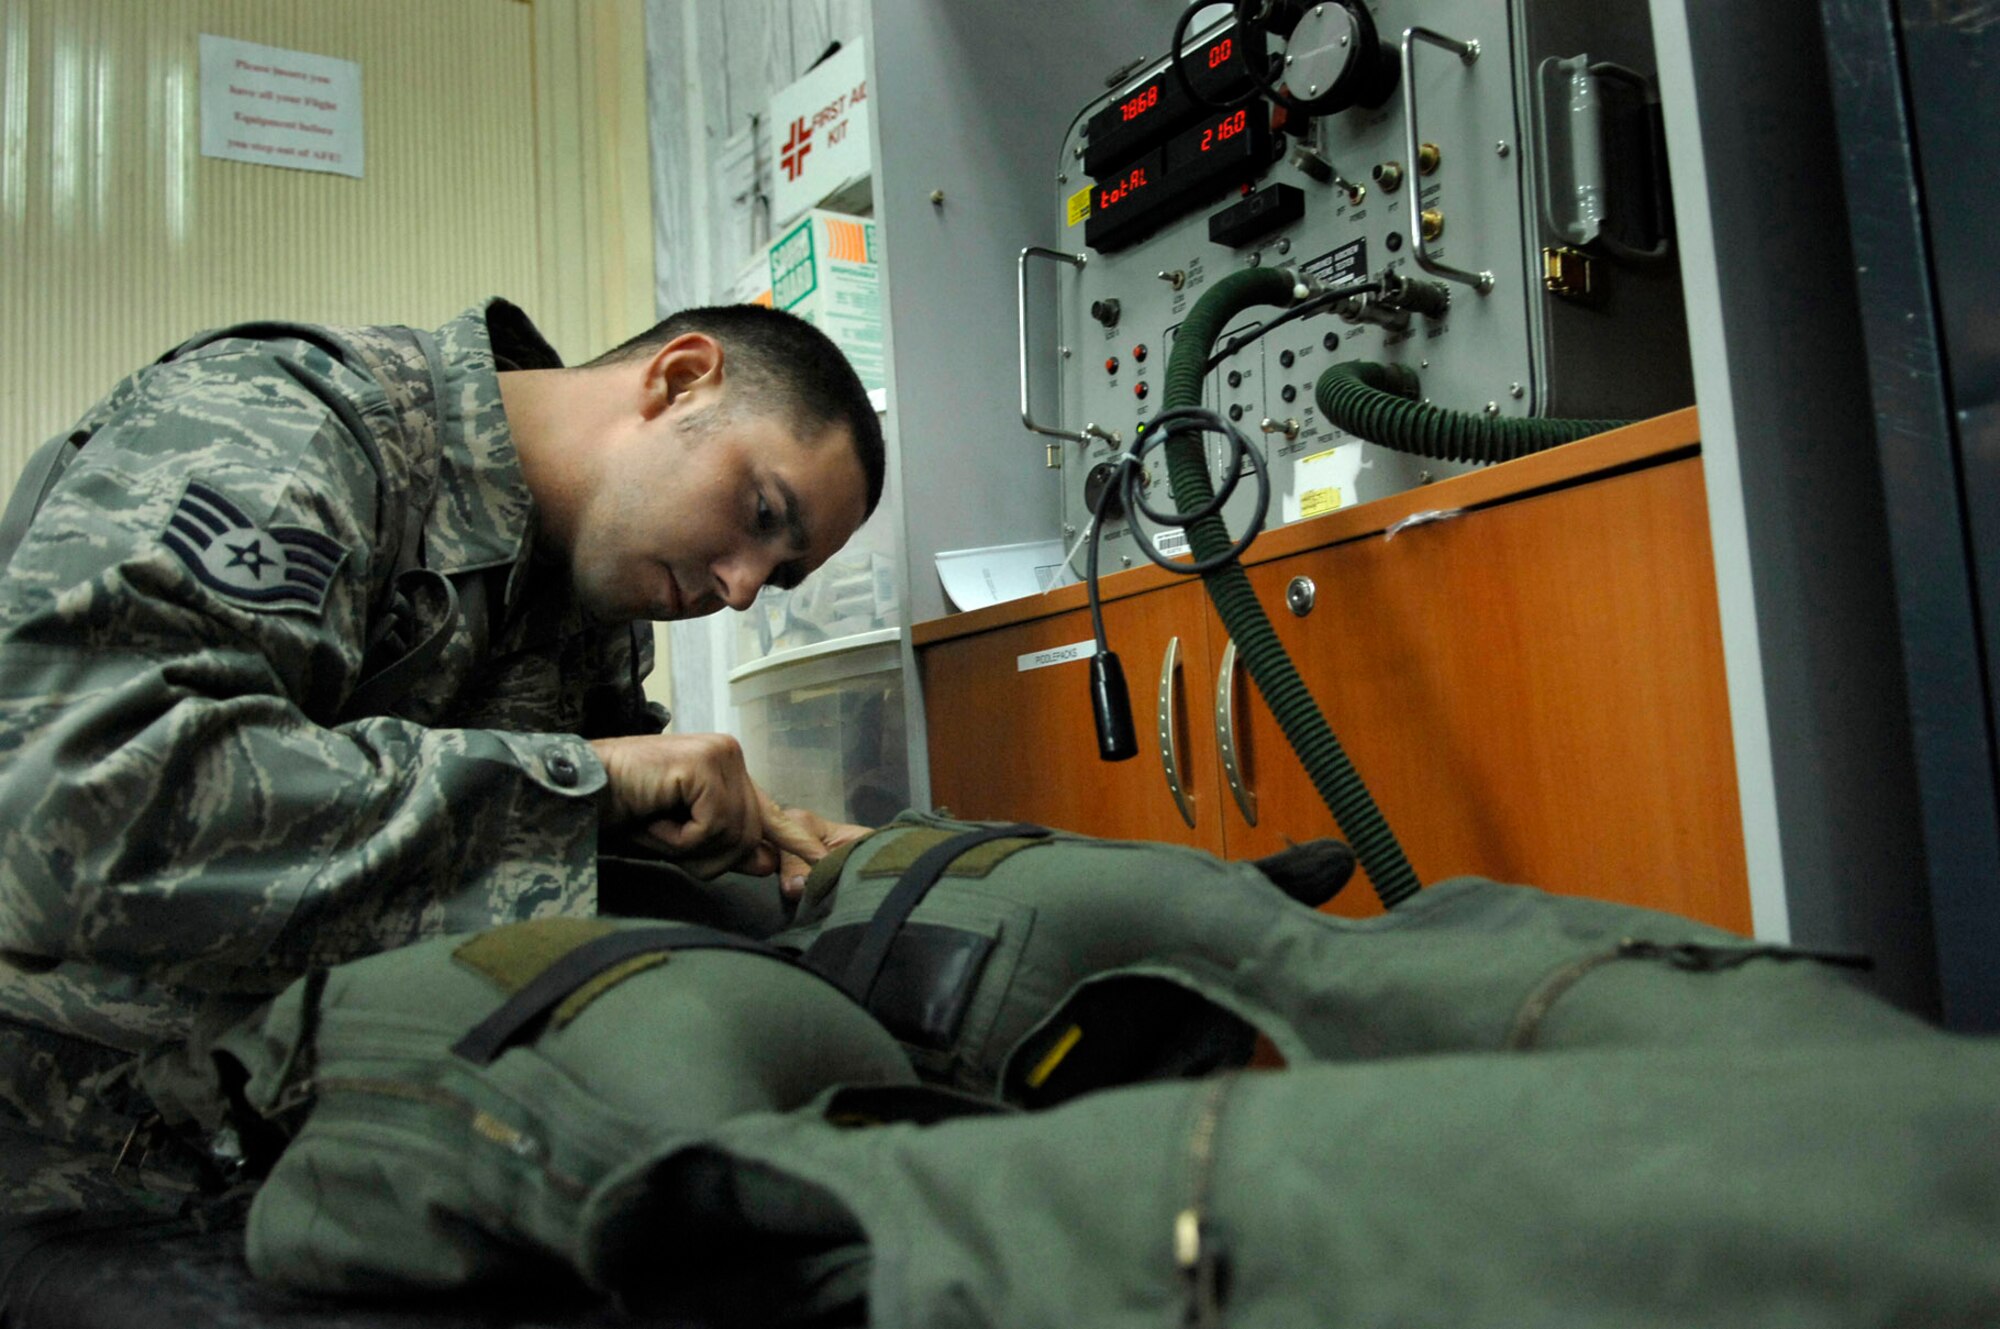 Staff Sgt. Matt Vincent inspect for any leaks in the air bladders of an anti-G suit June 23 at Joint Base Balad, Iraq. The suit is worn by F-16 Fighting Falcon pilots to combat the gravitational forces experienced during high-speed maneuvers. The suit prevents blood from rushing rapidly out of the brain, helping the pilot to maintain consciousness during flight. The technicians are responsible for the maintenance and operability of all the F-16 pilot gear, including their helmets and survival equipment. Sergeant Vincent is a 77th Expeditionary Fighter Squadron aircraft equipment technician deployed from Shaw Air Force Base, S.C. (U.S. Air Force photo/Senior Airman Julianne Showalter) 